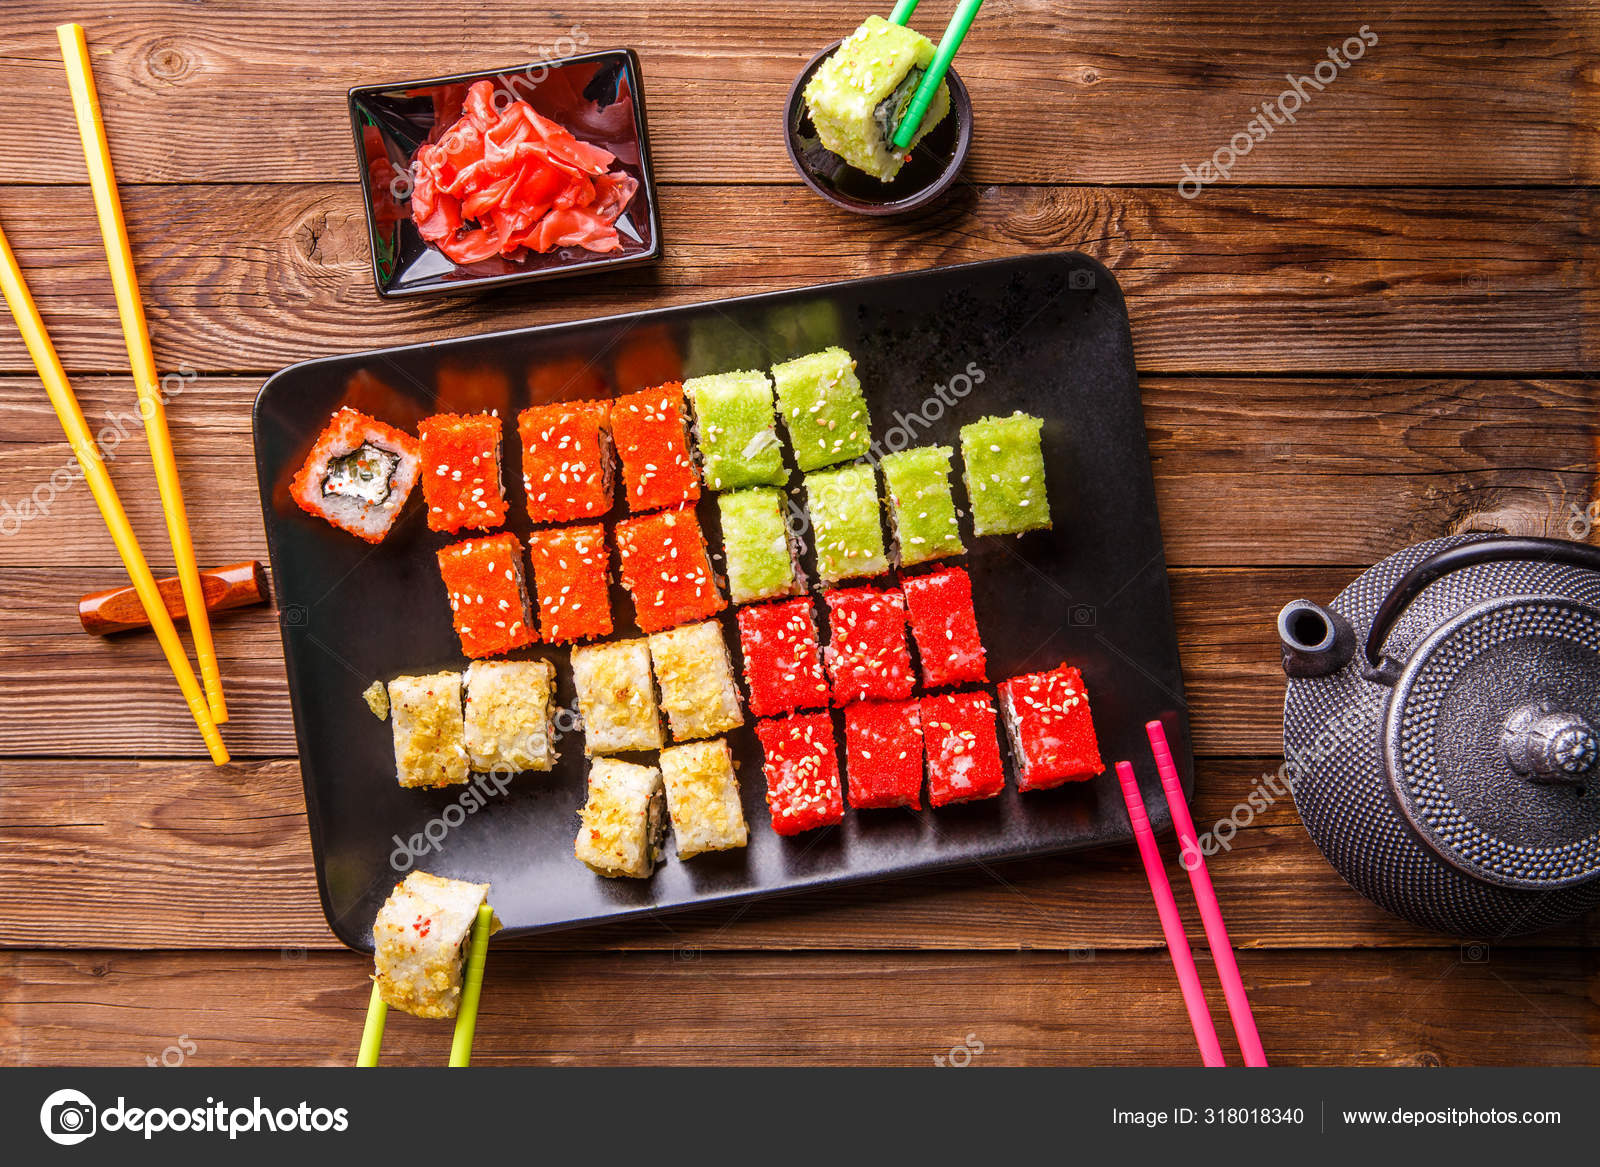 Sushi Roll Set Plate Soy Sauce Dark Wooden Background Stock Photo